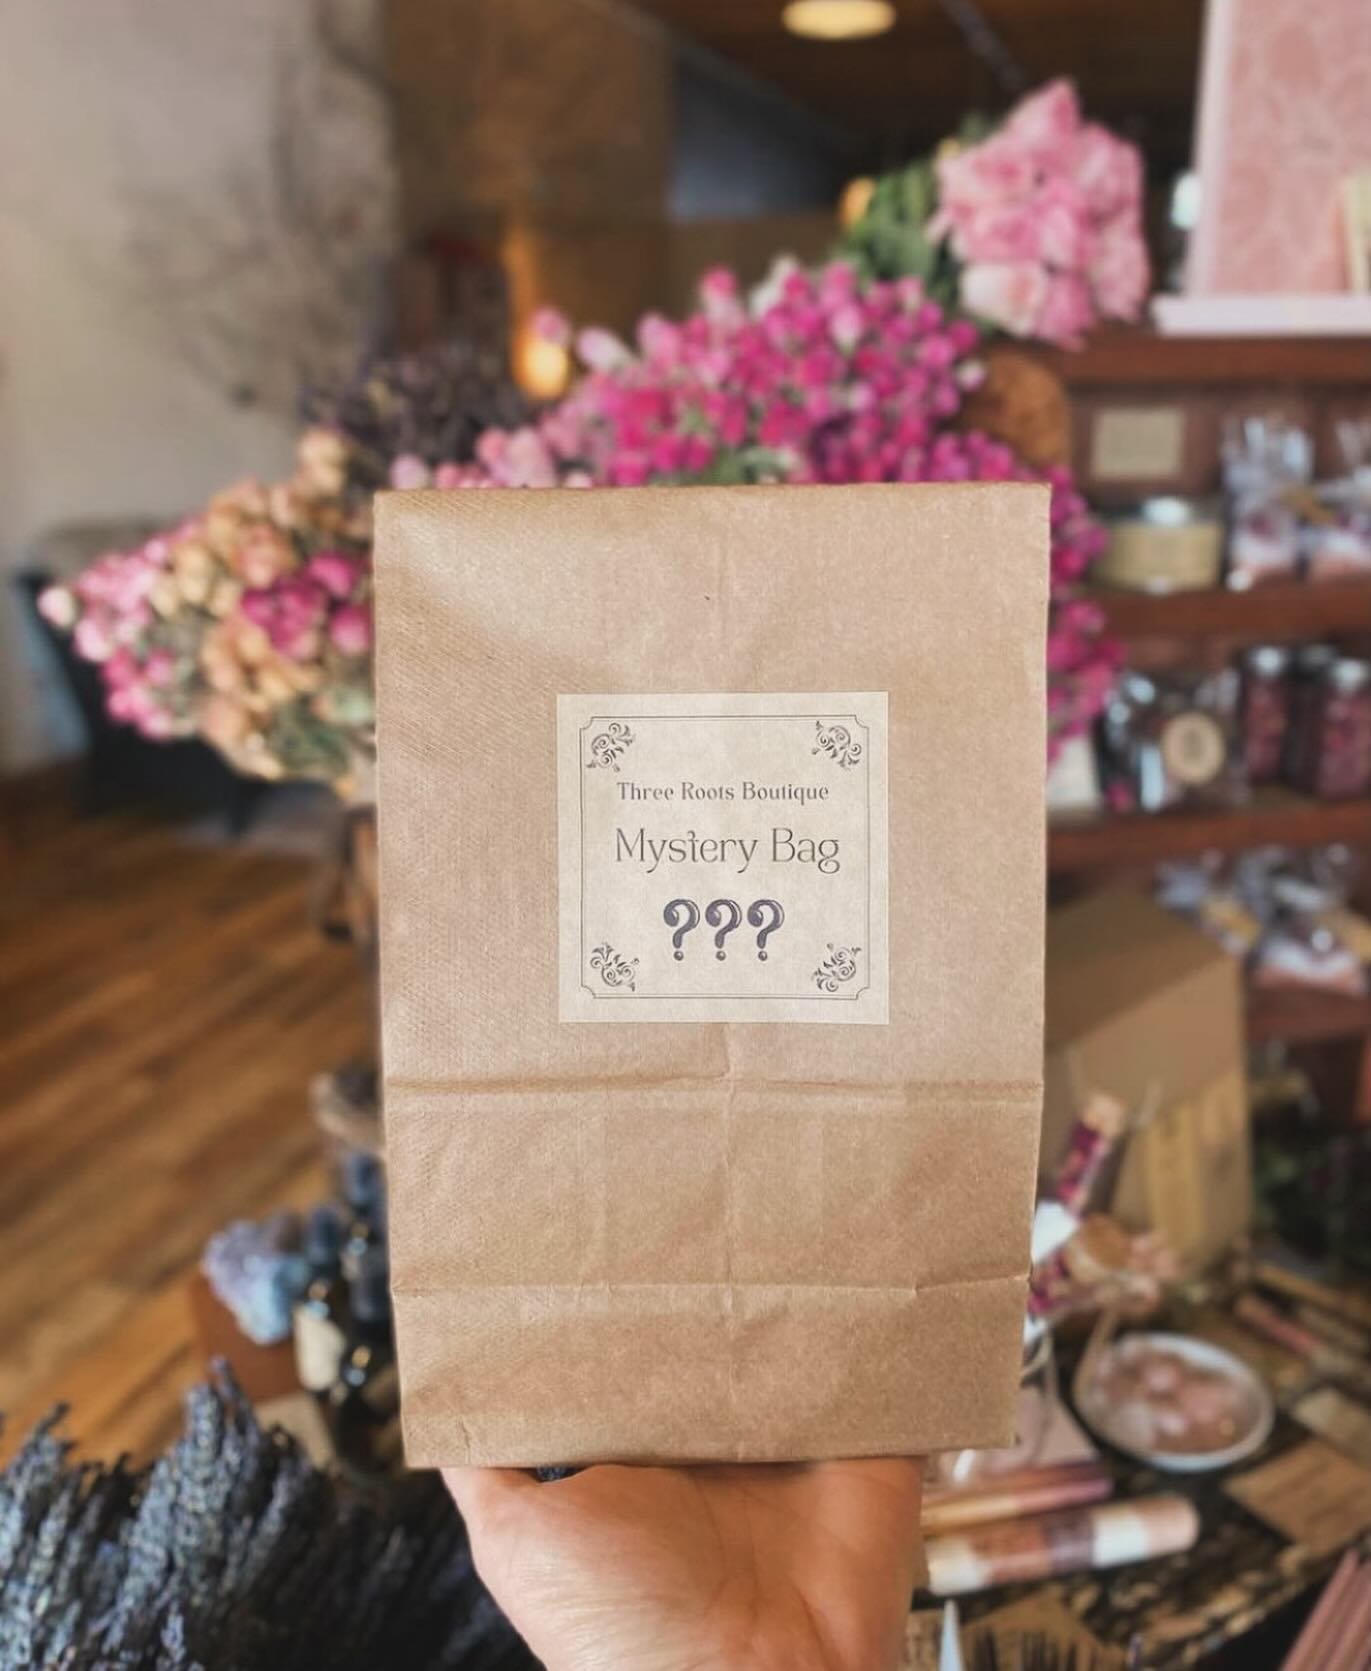 They're back! 

We have Mystery Bags today! Get them while they last. 
We have an assortment of amazing goodies from throughout the store in each bag. ❔❔❔

#easttx #gladewatertx